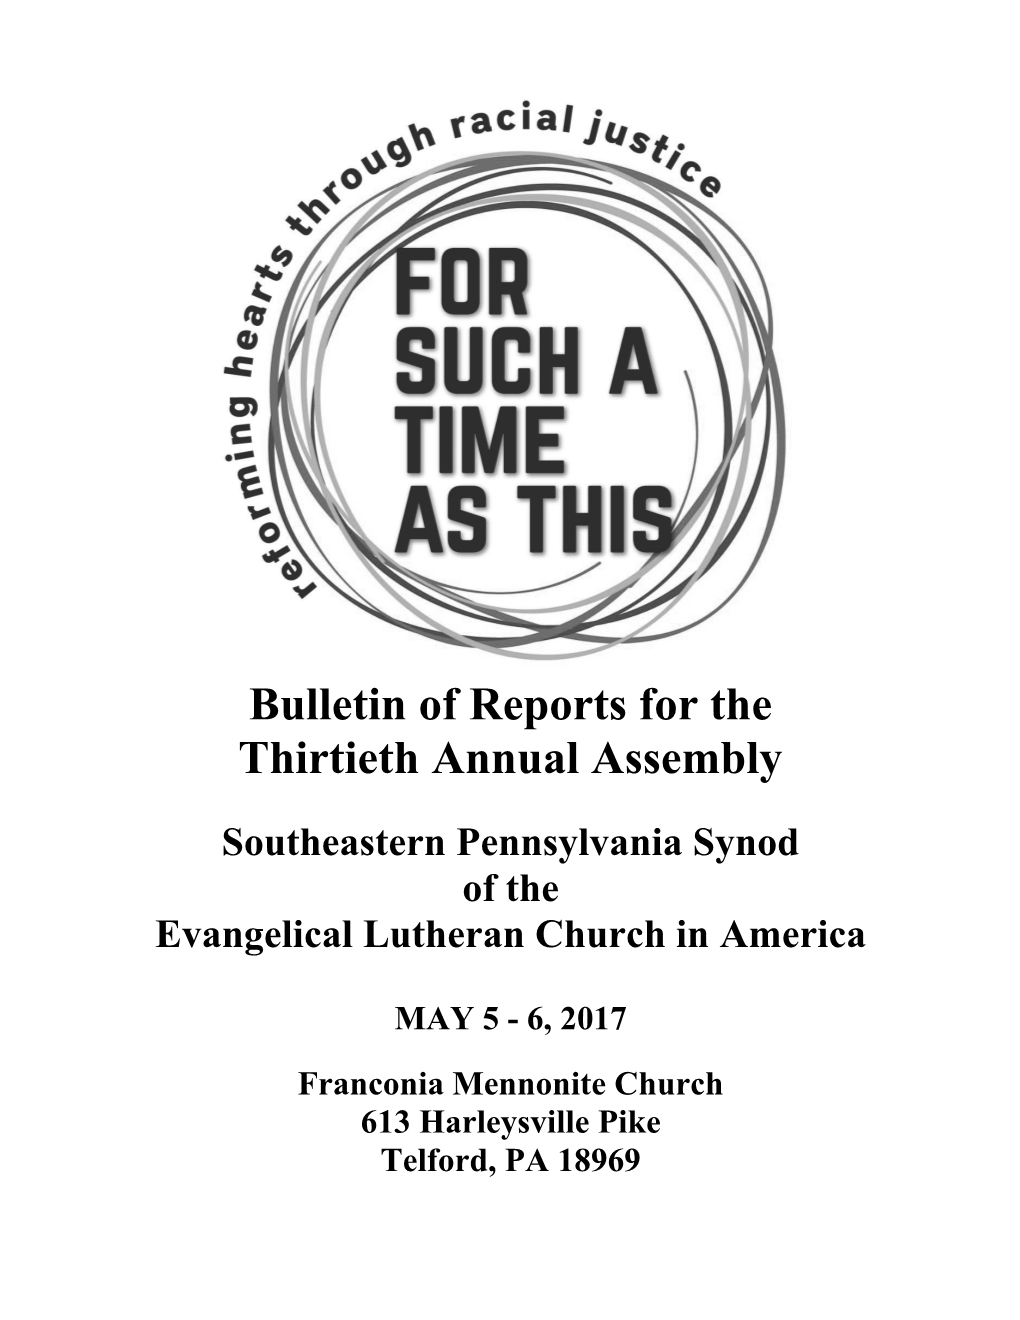 Bulletin of Reports 2017